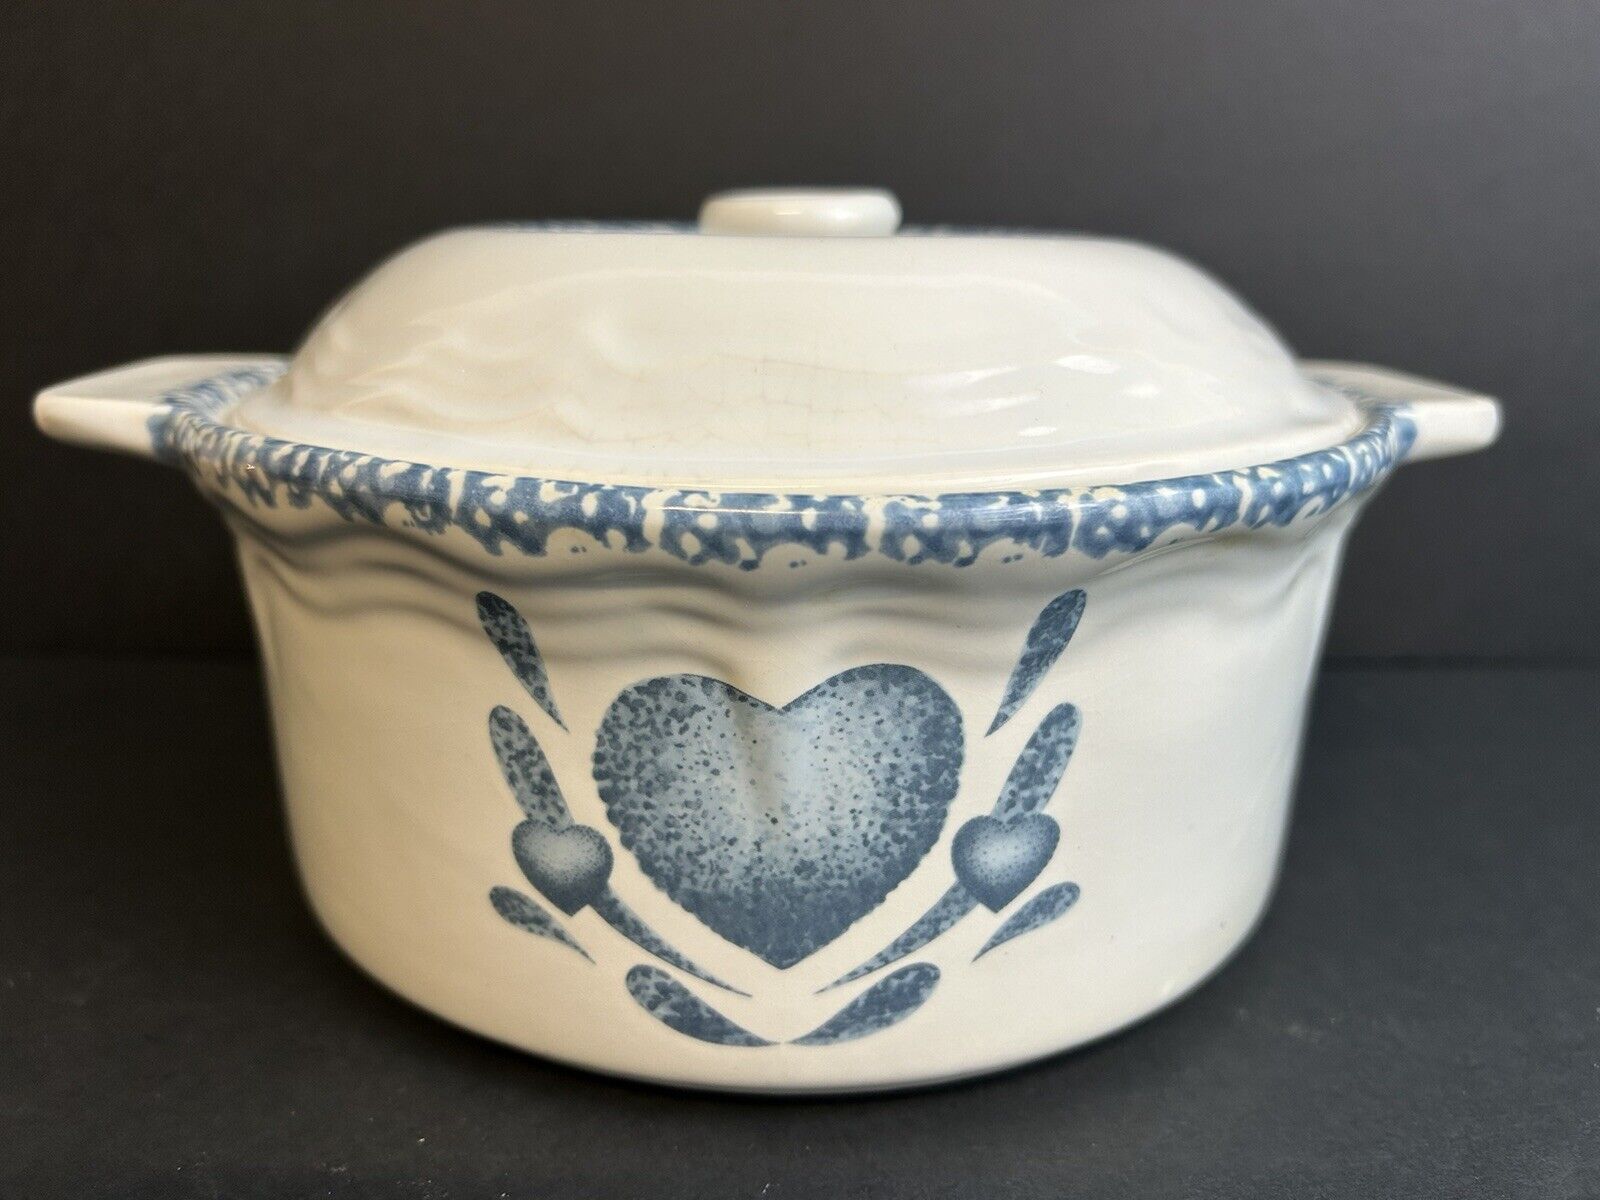 Vintage Corelle Casserole Dish with Lid White with Blue Hearts Casserole Dish 